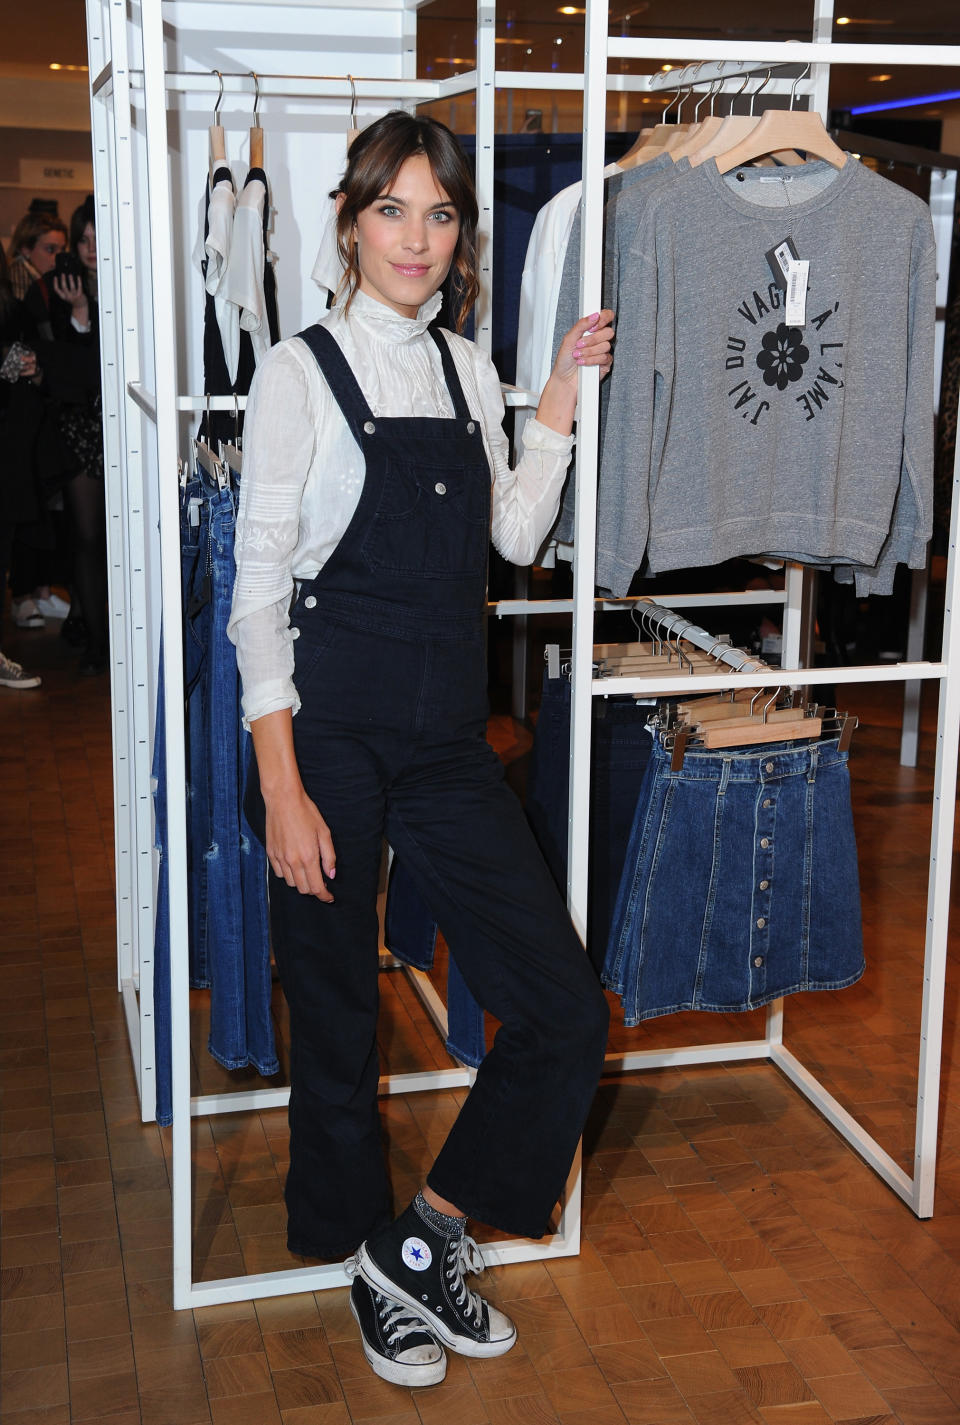 LONDON, ENGLAND - JANUARY 15:  Alexa Chung launches her new jeans collection 'Alexa Chung x AG' at Selfridges on January 15, 2015 in London, England.  (Photo by Eamonn McCormack/WireImage)